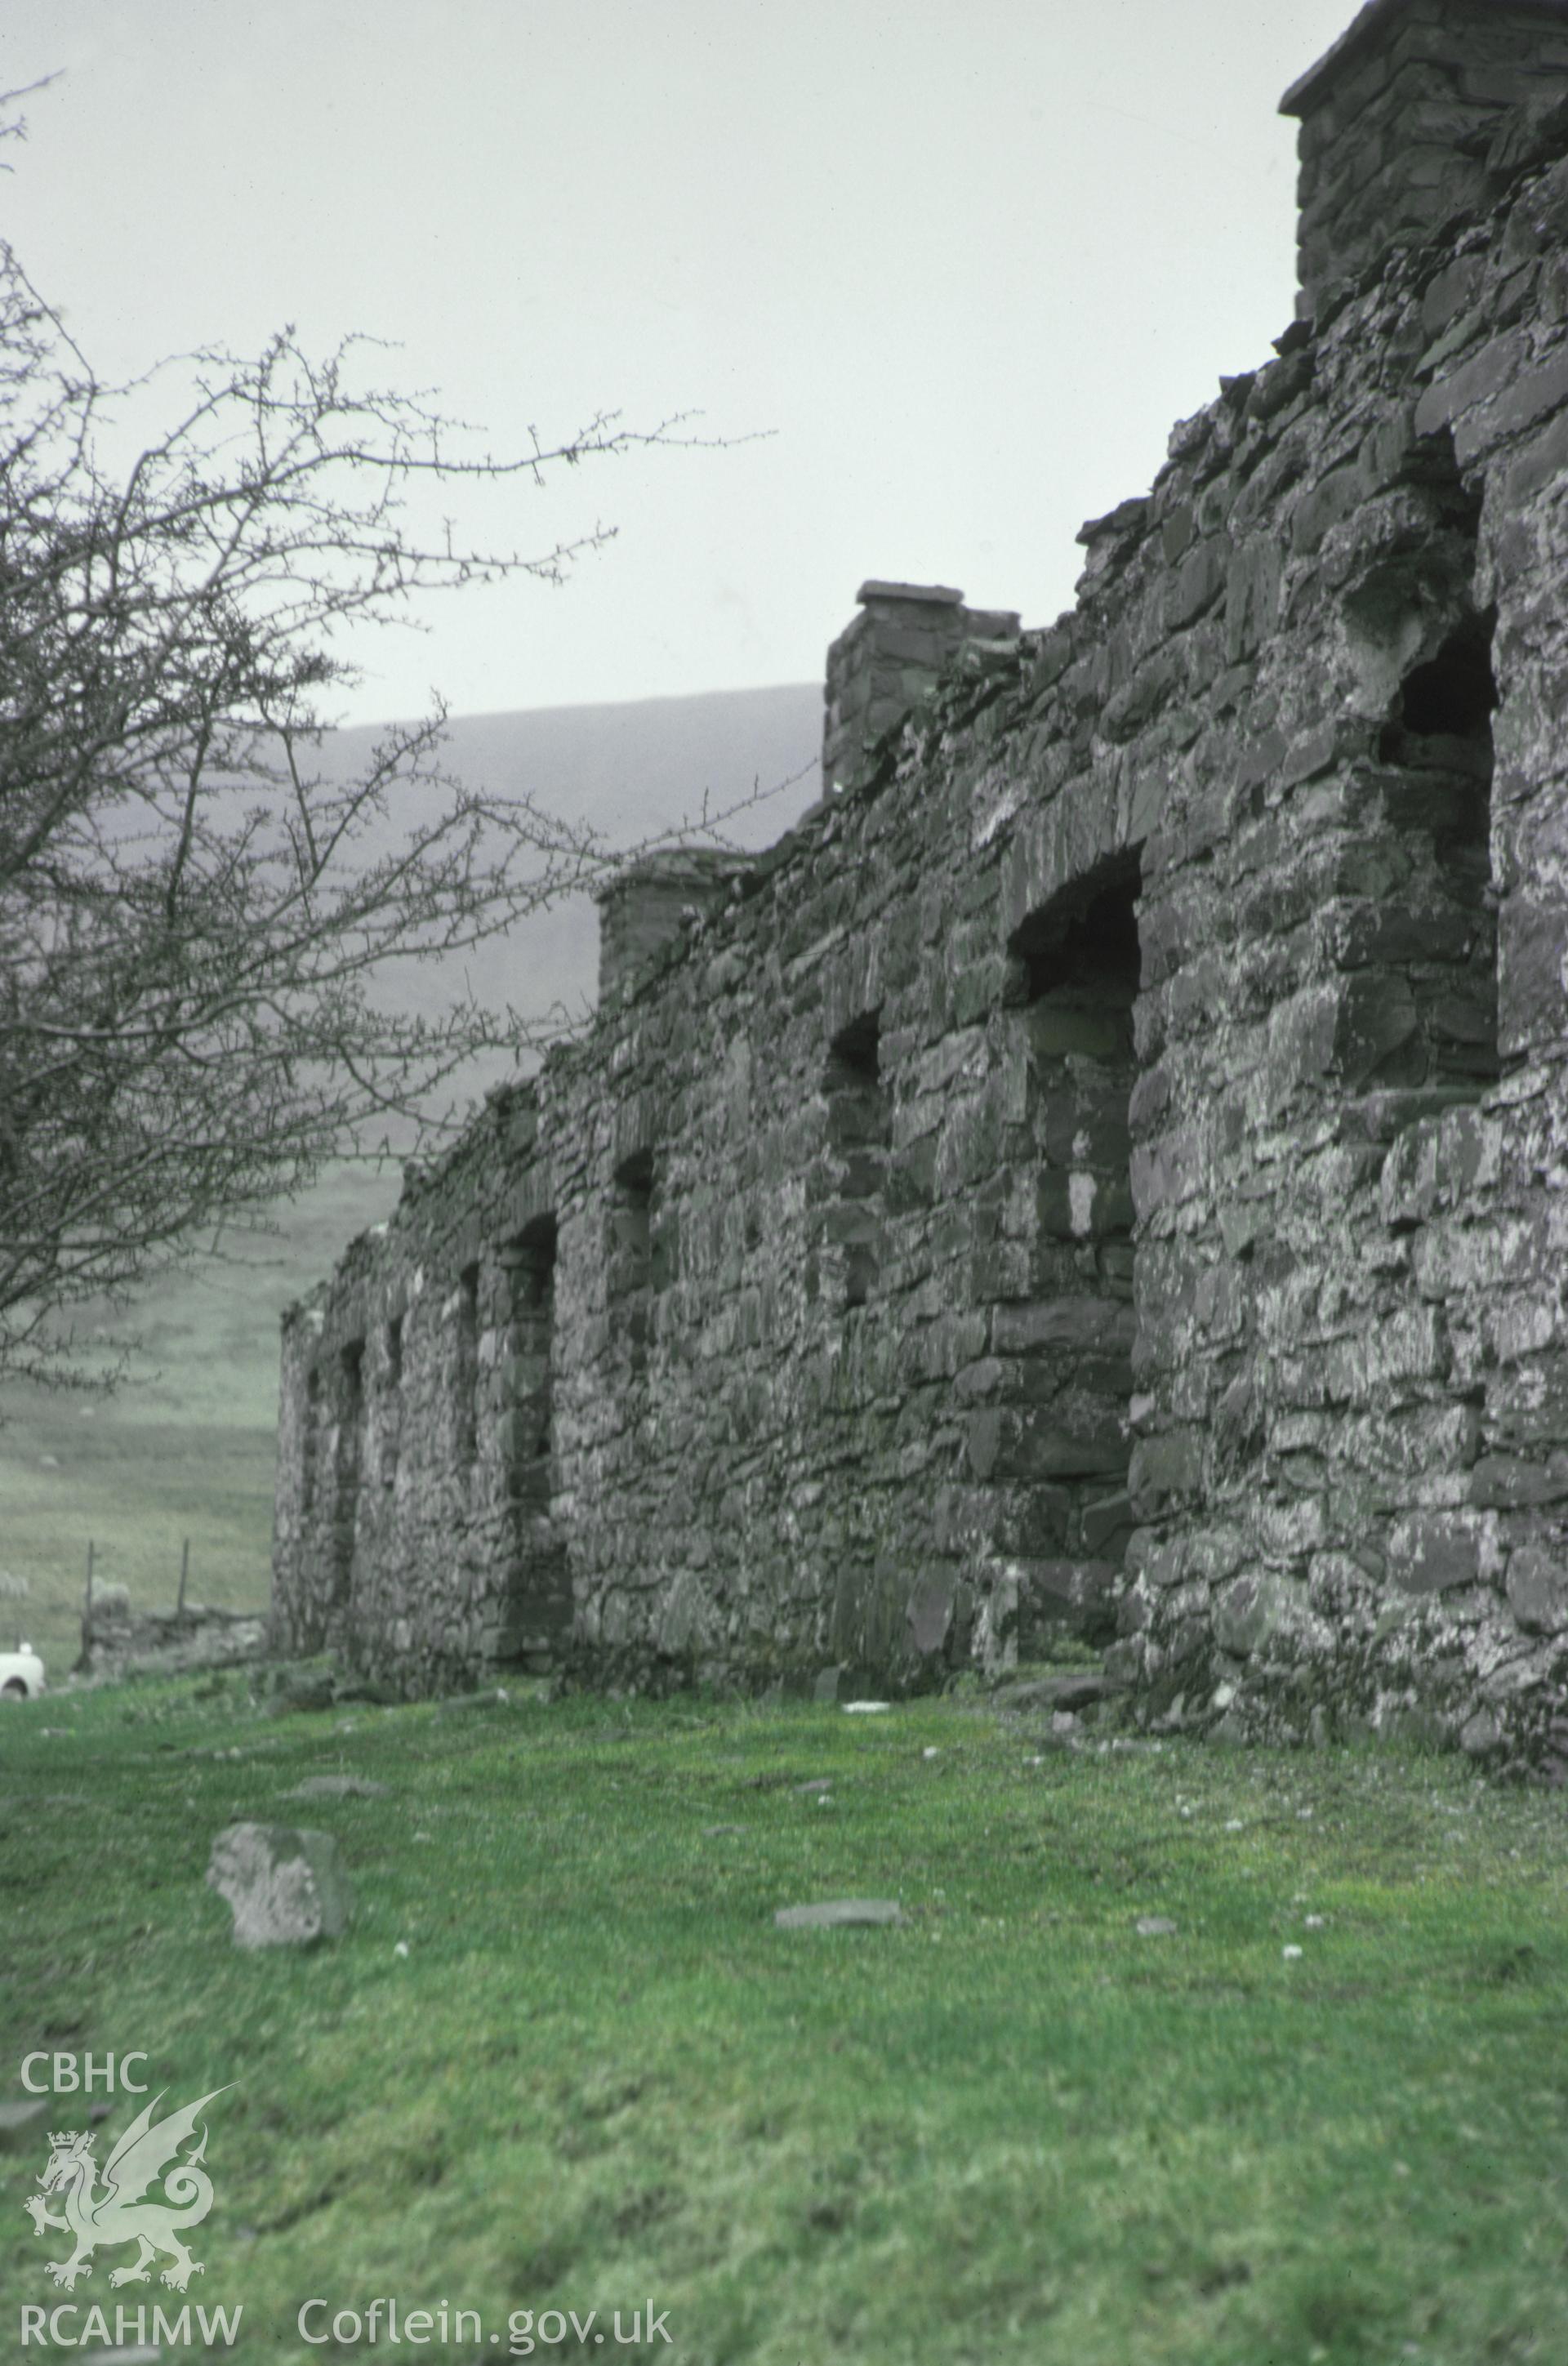 Digital copy of a colour slide showing a view of Cwm Gorlan Squatter Settlement, copied from a colour slide taken by Stephen Hughes, 1976.